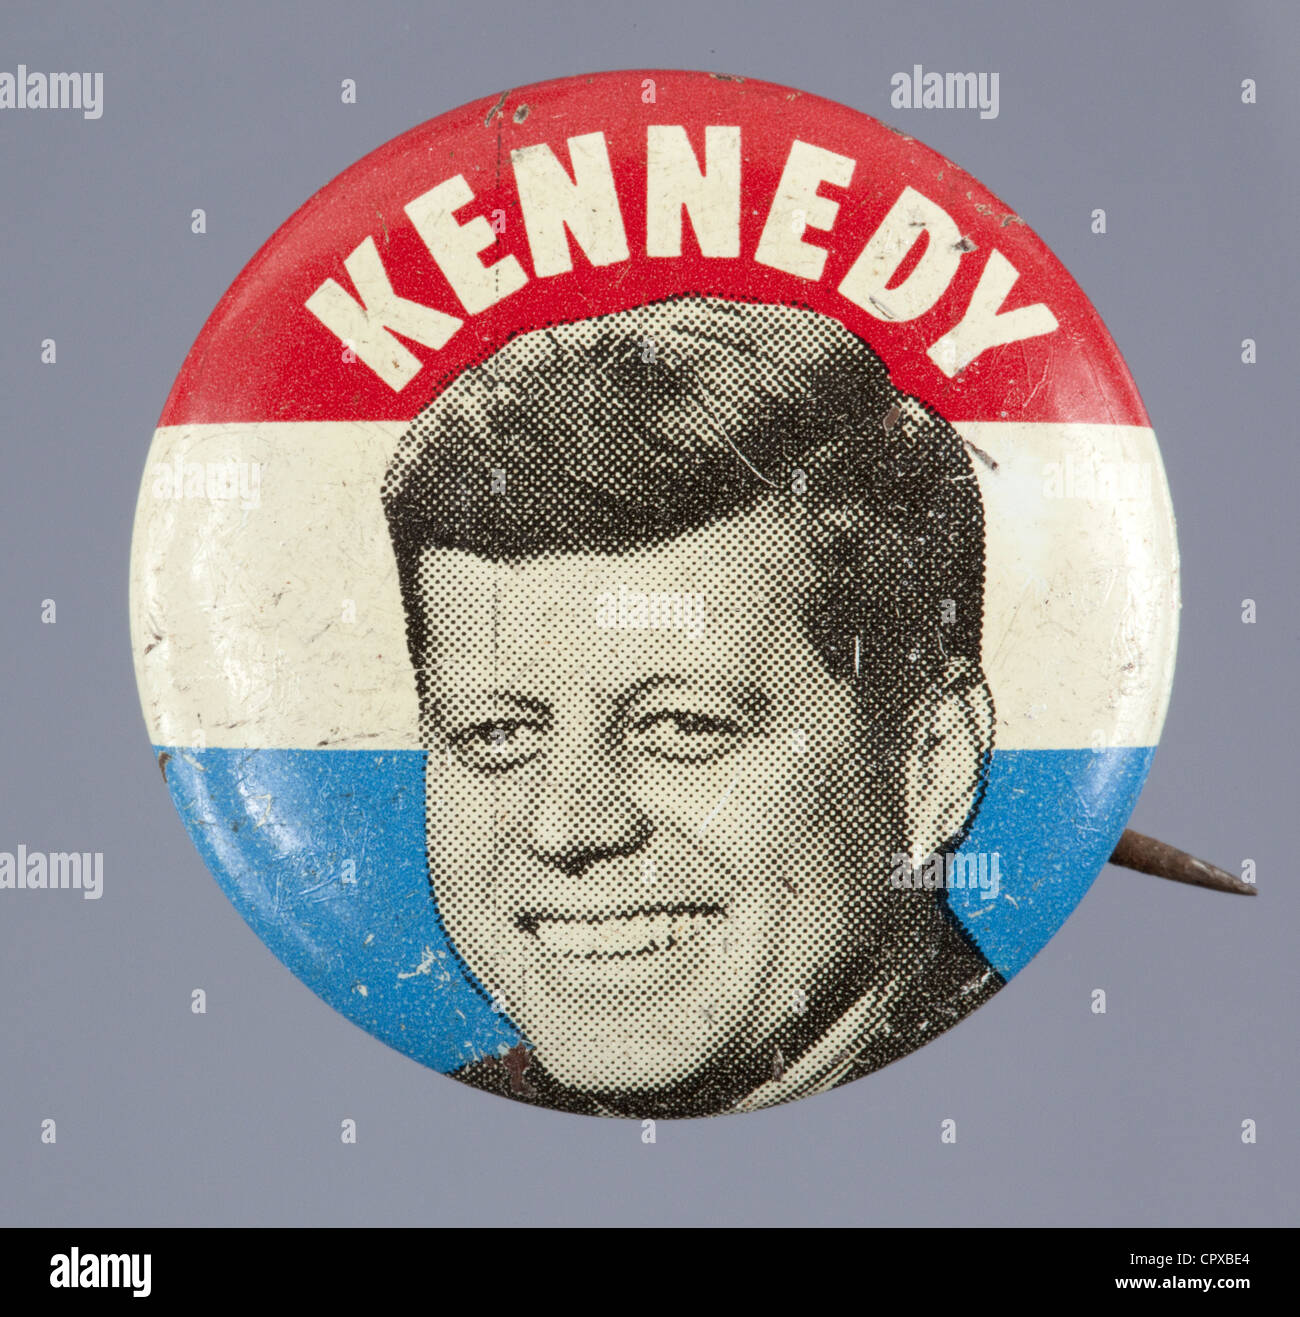 1960 U.S. presidential campaign button for John F. Kennedy Stock Photo